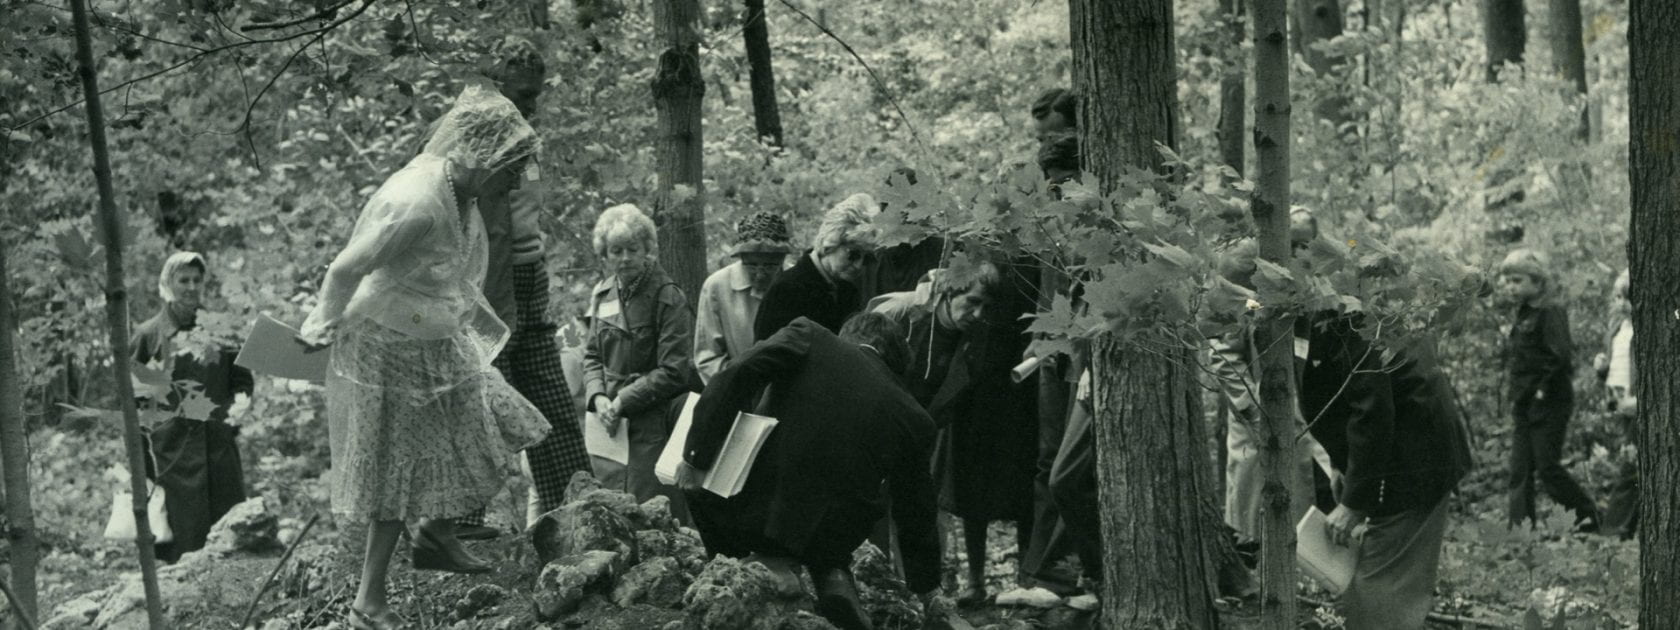 A group of people gather and look at the stump of a tree in the woods. One woman on the left is pulling up her skirt as she walks nearer to the group.